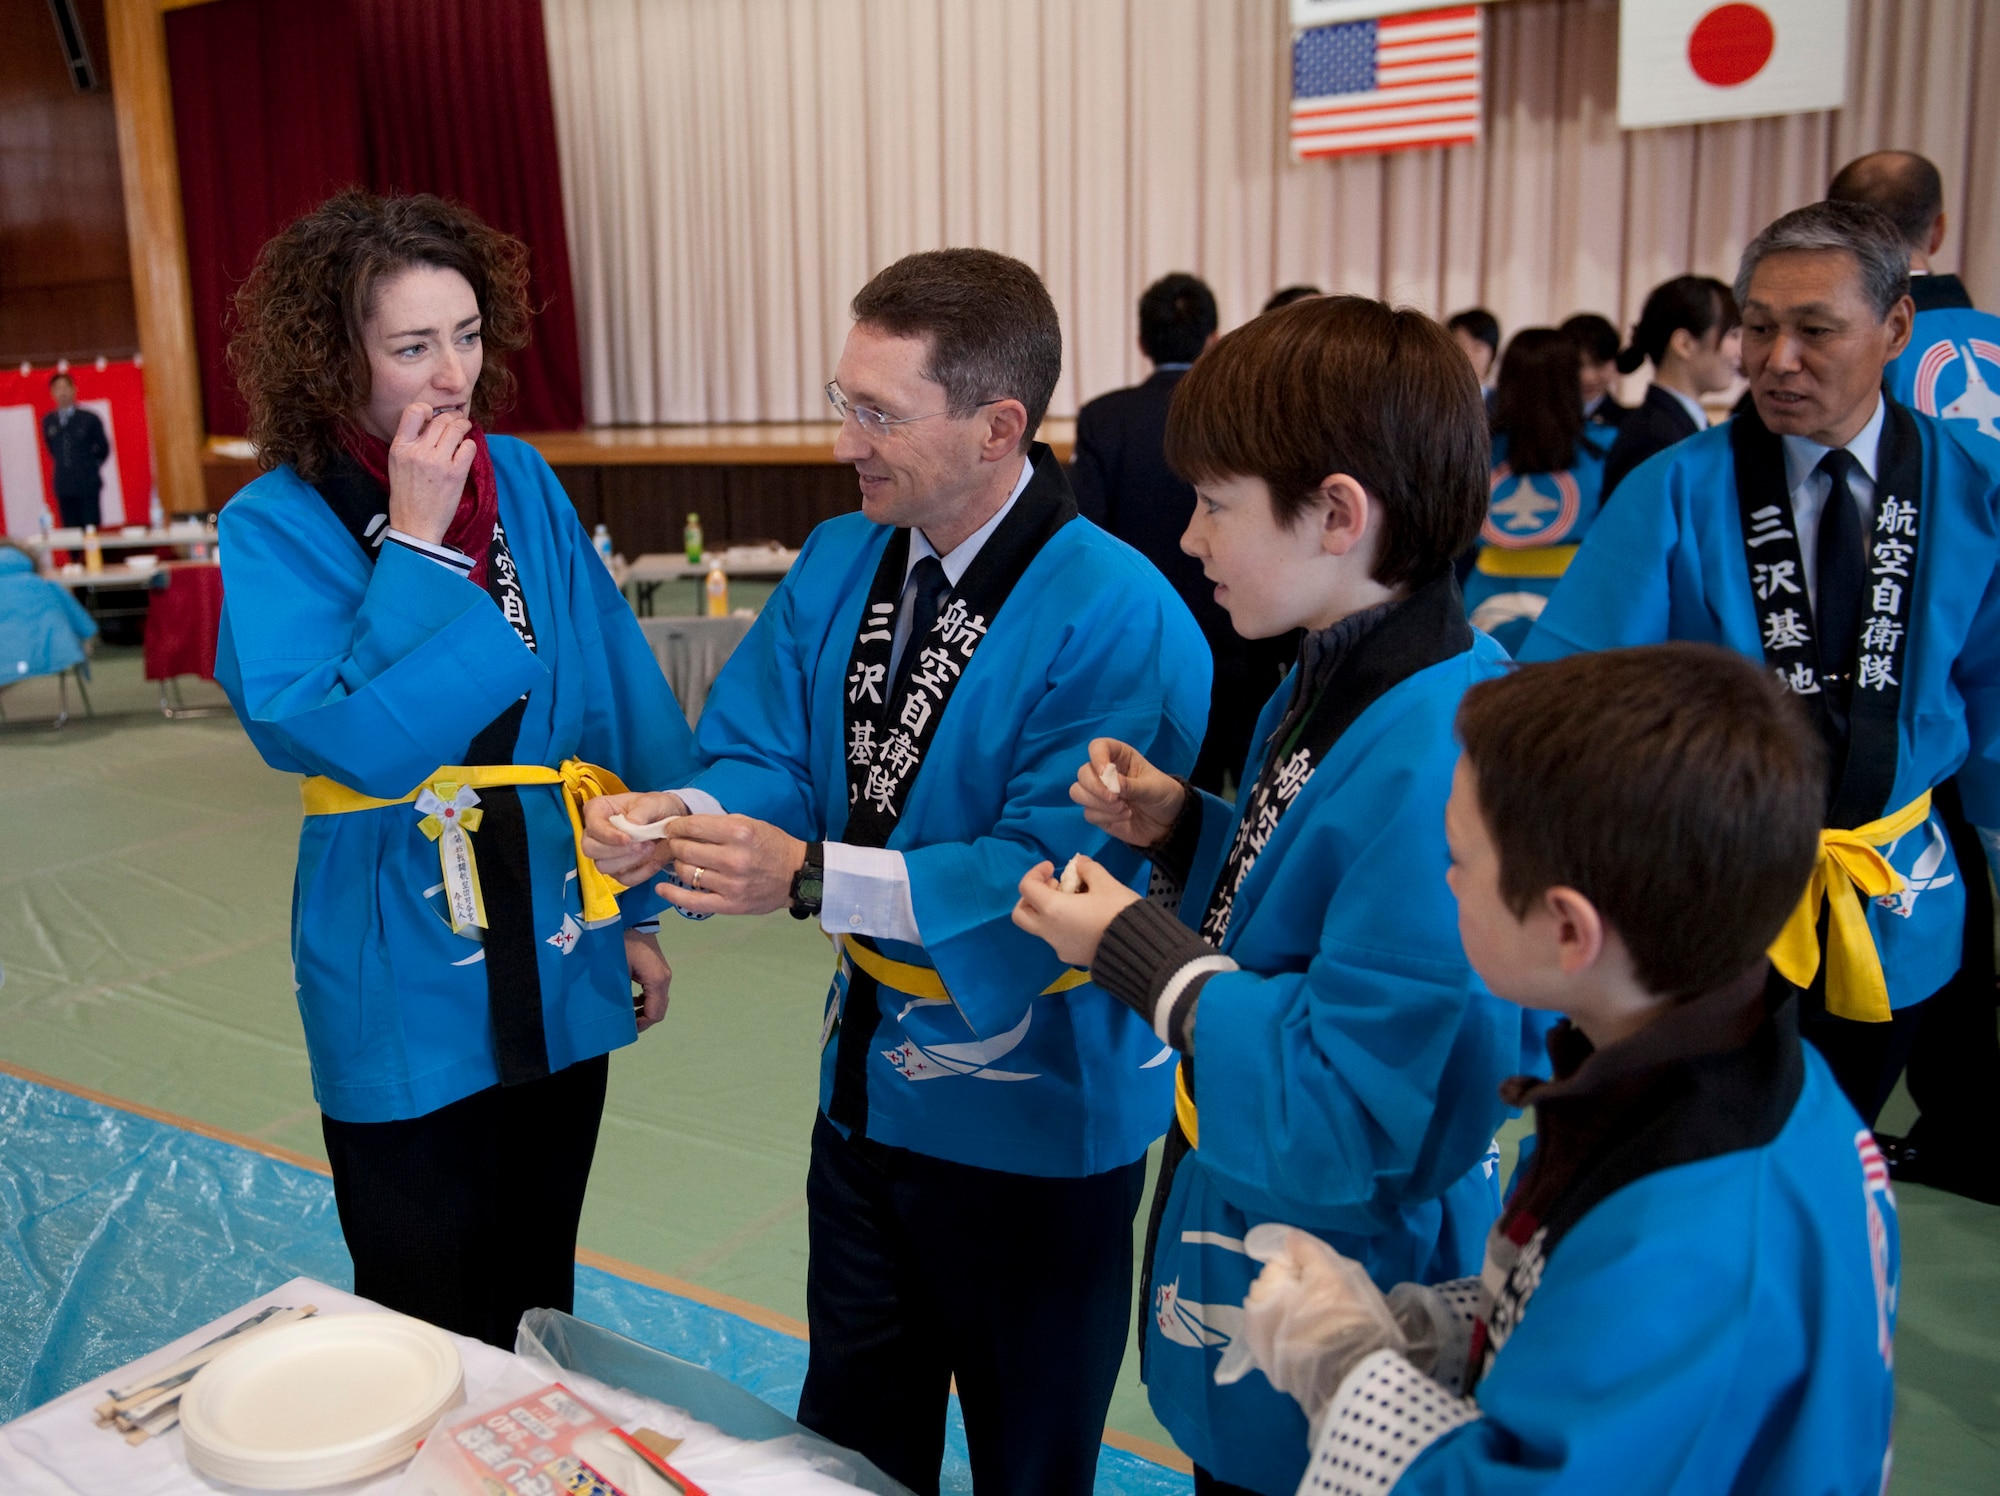 The Rothstein family tries freshly made mochi during the annual mochi pounding ceremony at the Japan Air Self-Defense Force gym, Misawa Air Base, Japan; Dec. 16, 2010. After taking turns pounding steamed rice into the traditional Japanese rice cakes, local dignitaries and their families were able to try the mochi. (U.S. Air Force photo by Staff Sgt. Samuel Morse/Released)